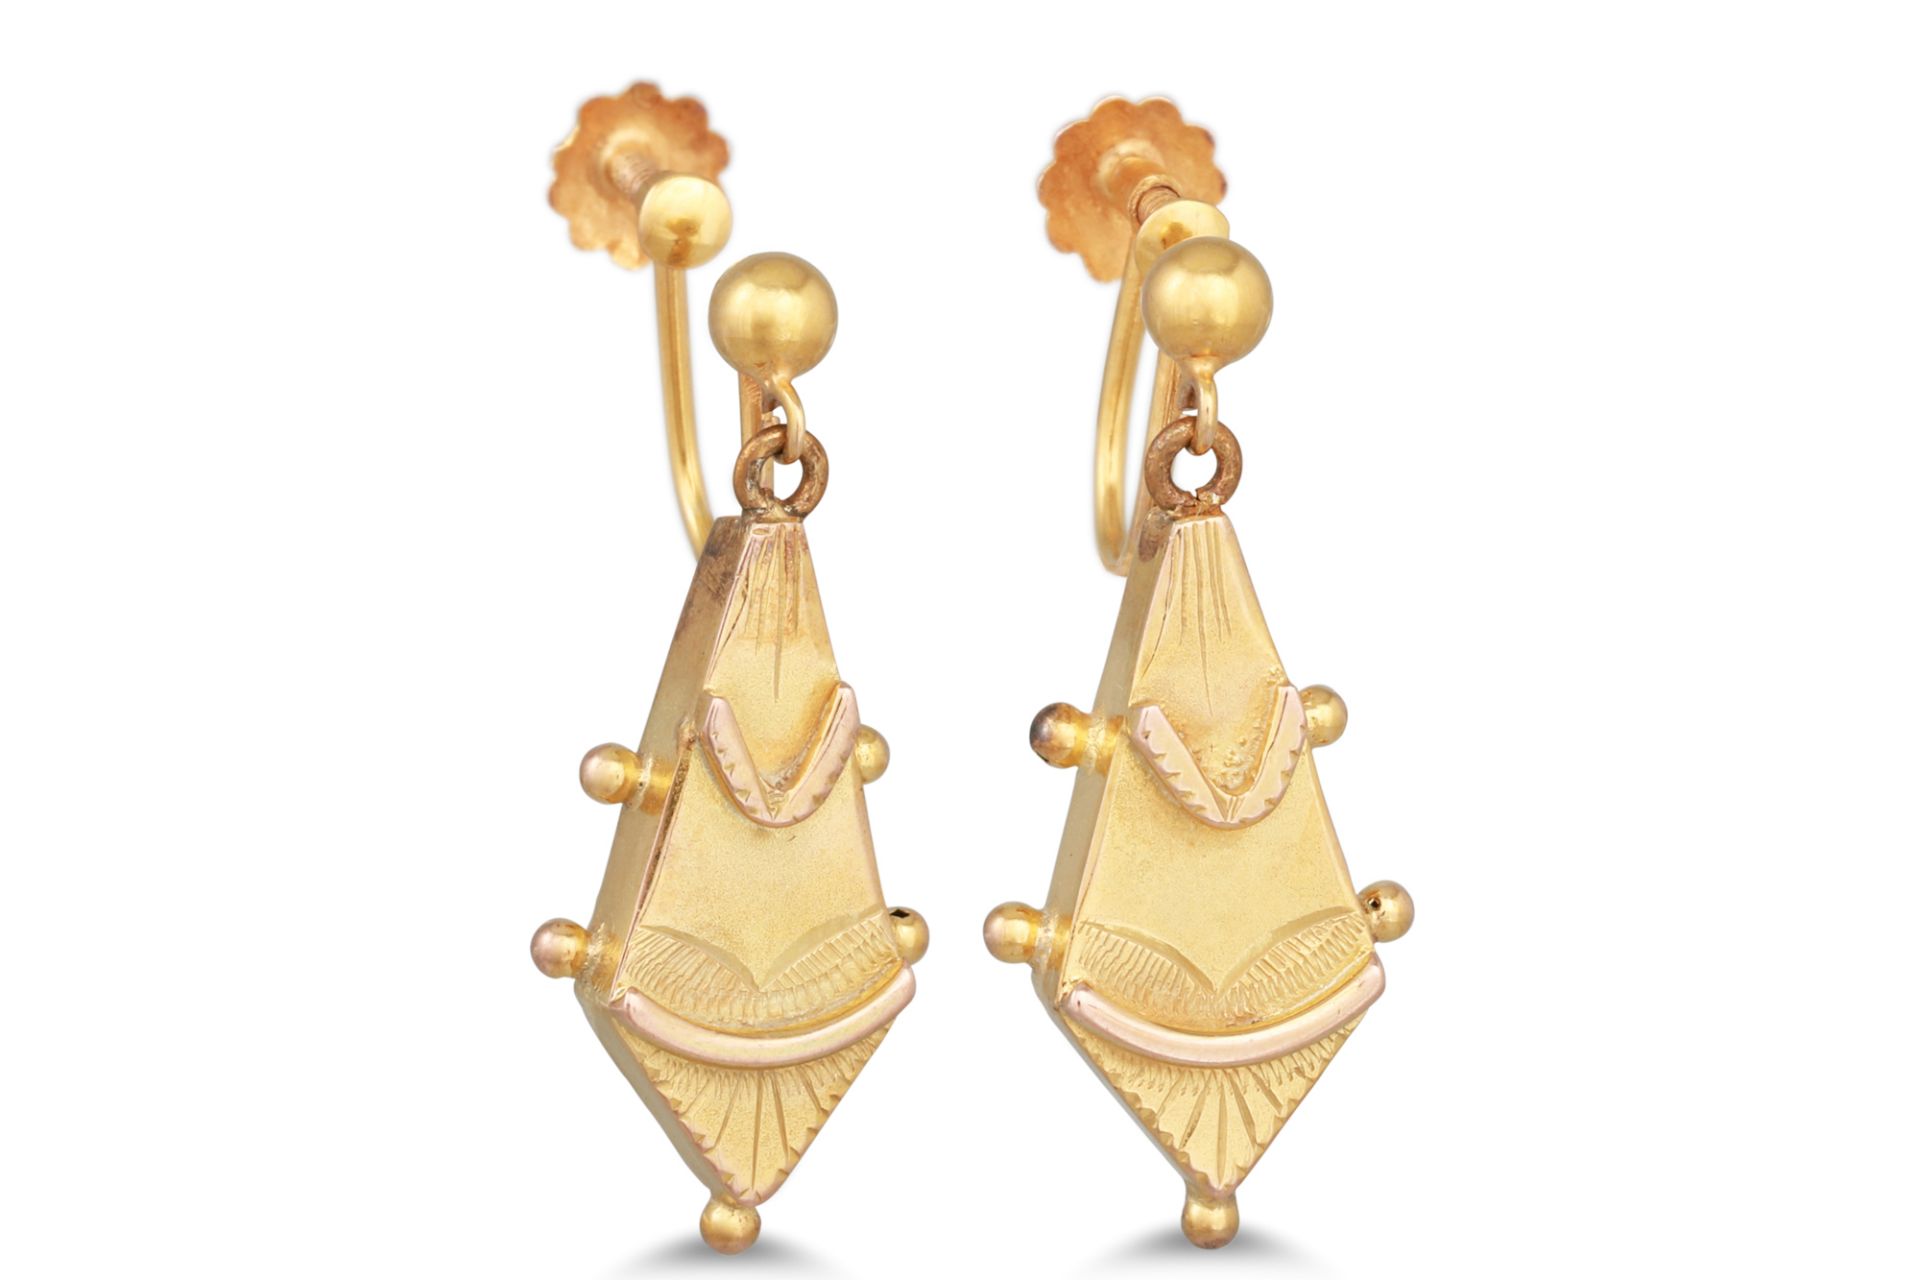 A PAIR OF ANTIQUE DROP EARRINGS, mounted in 9ct gold, screw on fittings